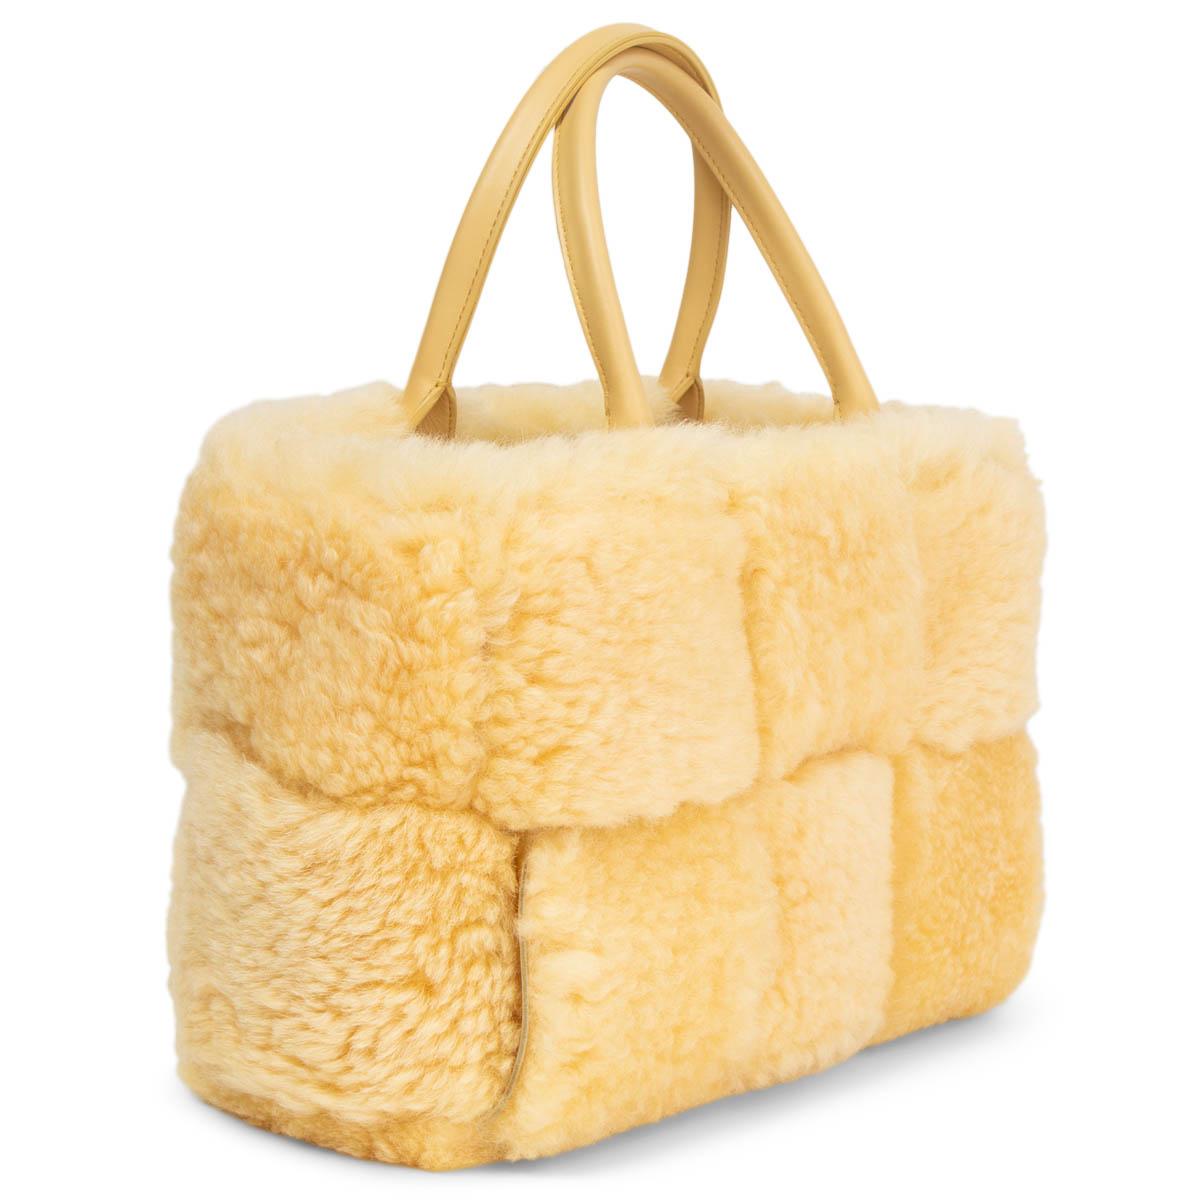 100% authentic Bottega Veneta Small Arco Intrecciato tote bag in Teddy (vanilla) fluffy shearling hand-woven into a blown-up intrecciato pattern. Made with tonal leather top handles and a detachable zipper pouch. Has been carried and is in excellent